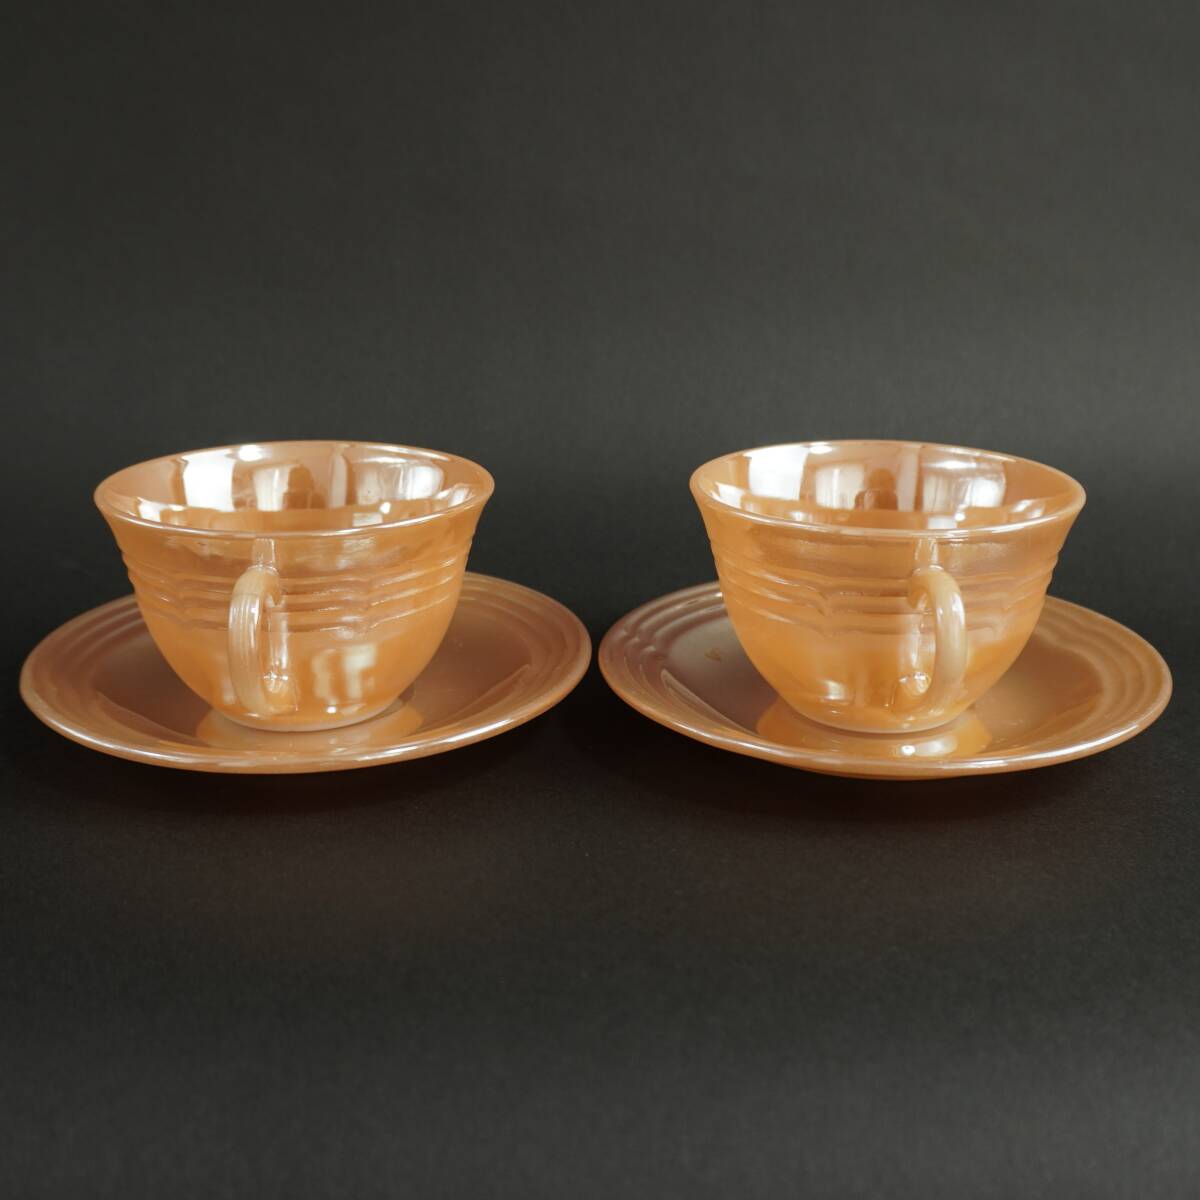 Fire King Peach Raster Cup & Saucer 2pcs Vintage ファイアーキング カップ ソーサー ティーカップ ヴィンテージ 2個セット 1960年代